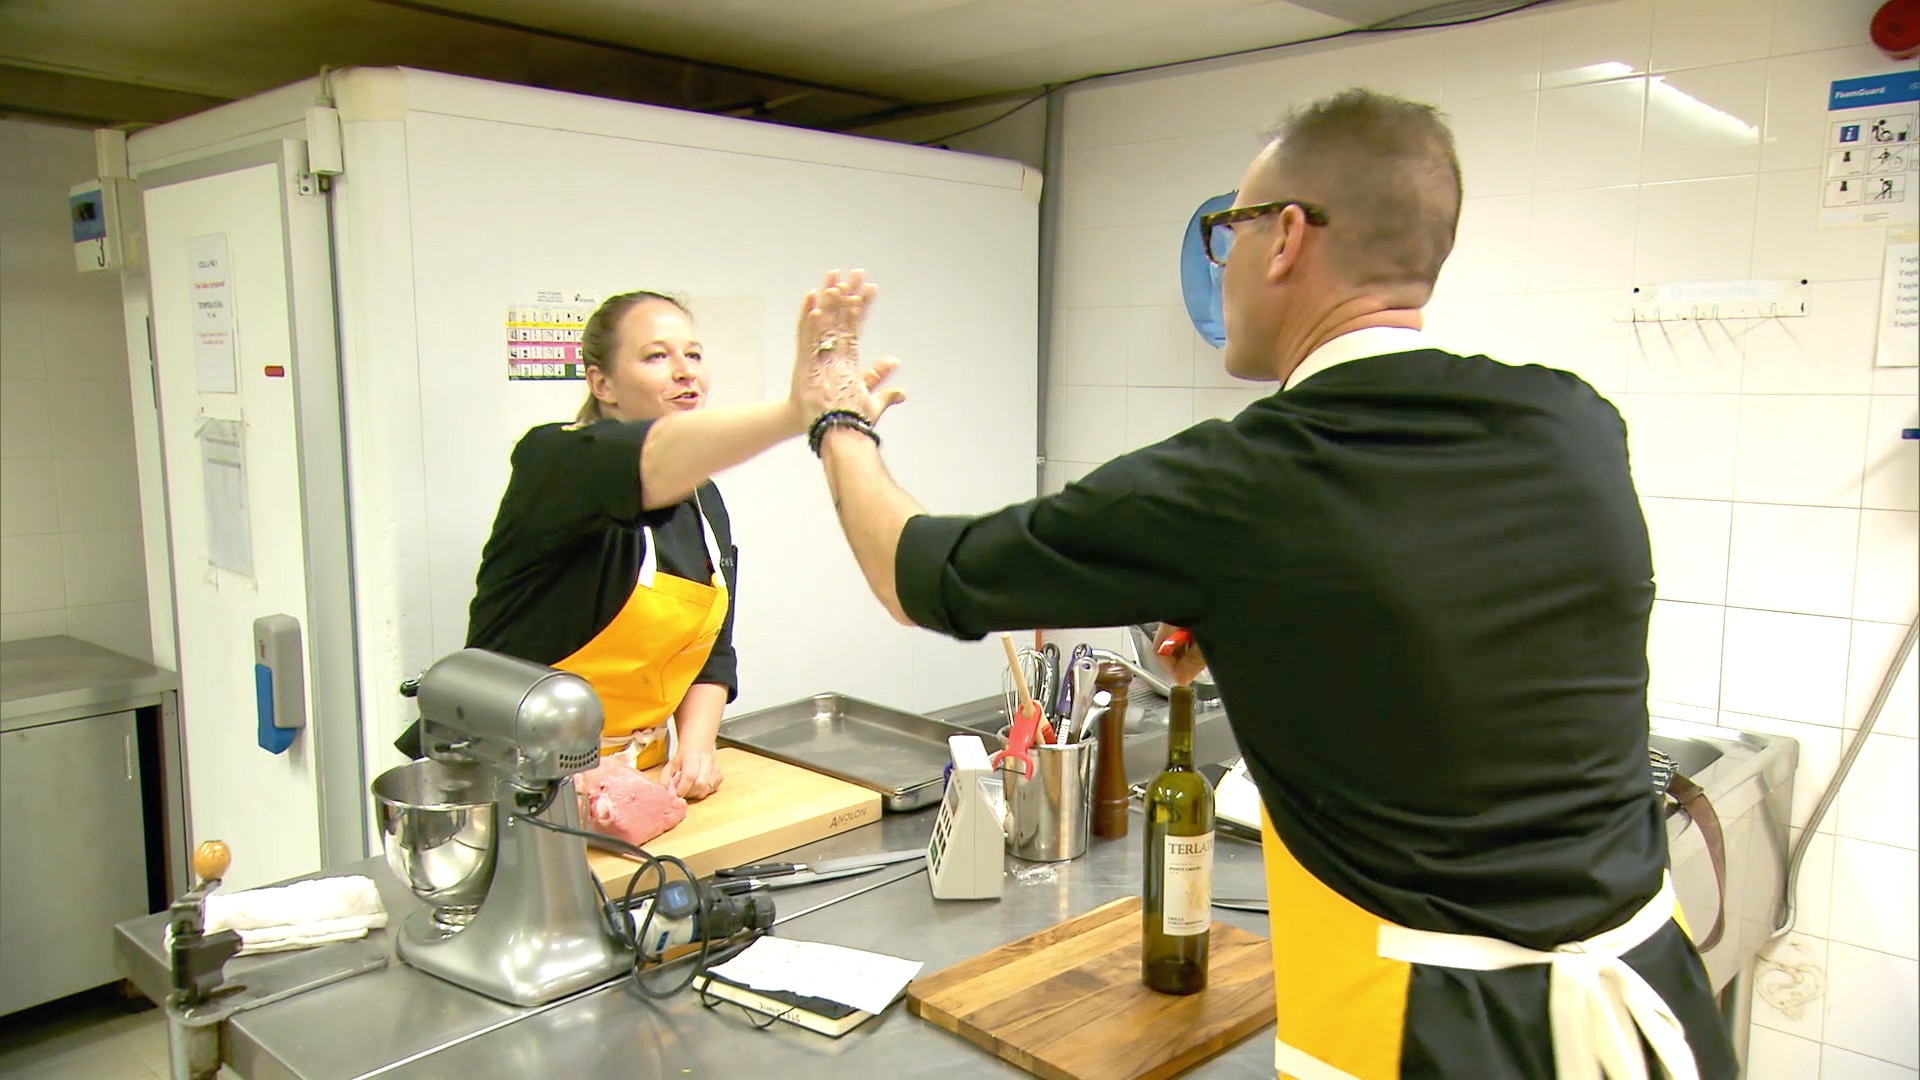 Watch Top Chef Sneak Peek Eliminated Chefs Return to Assist the Top 3